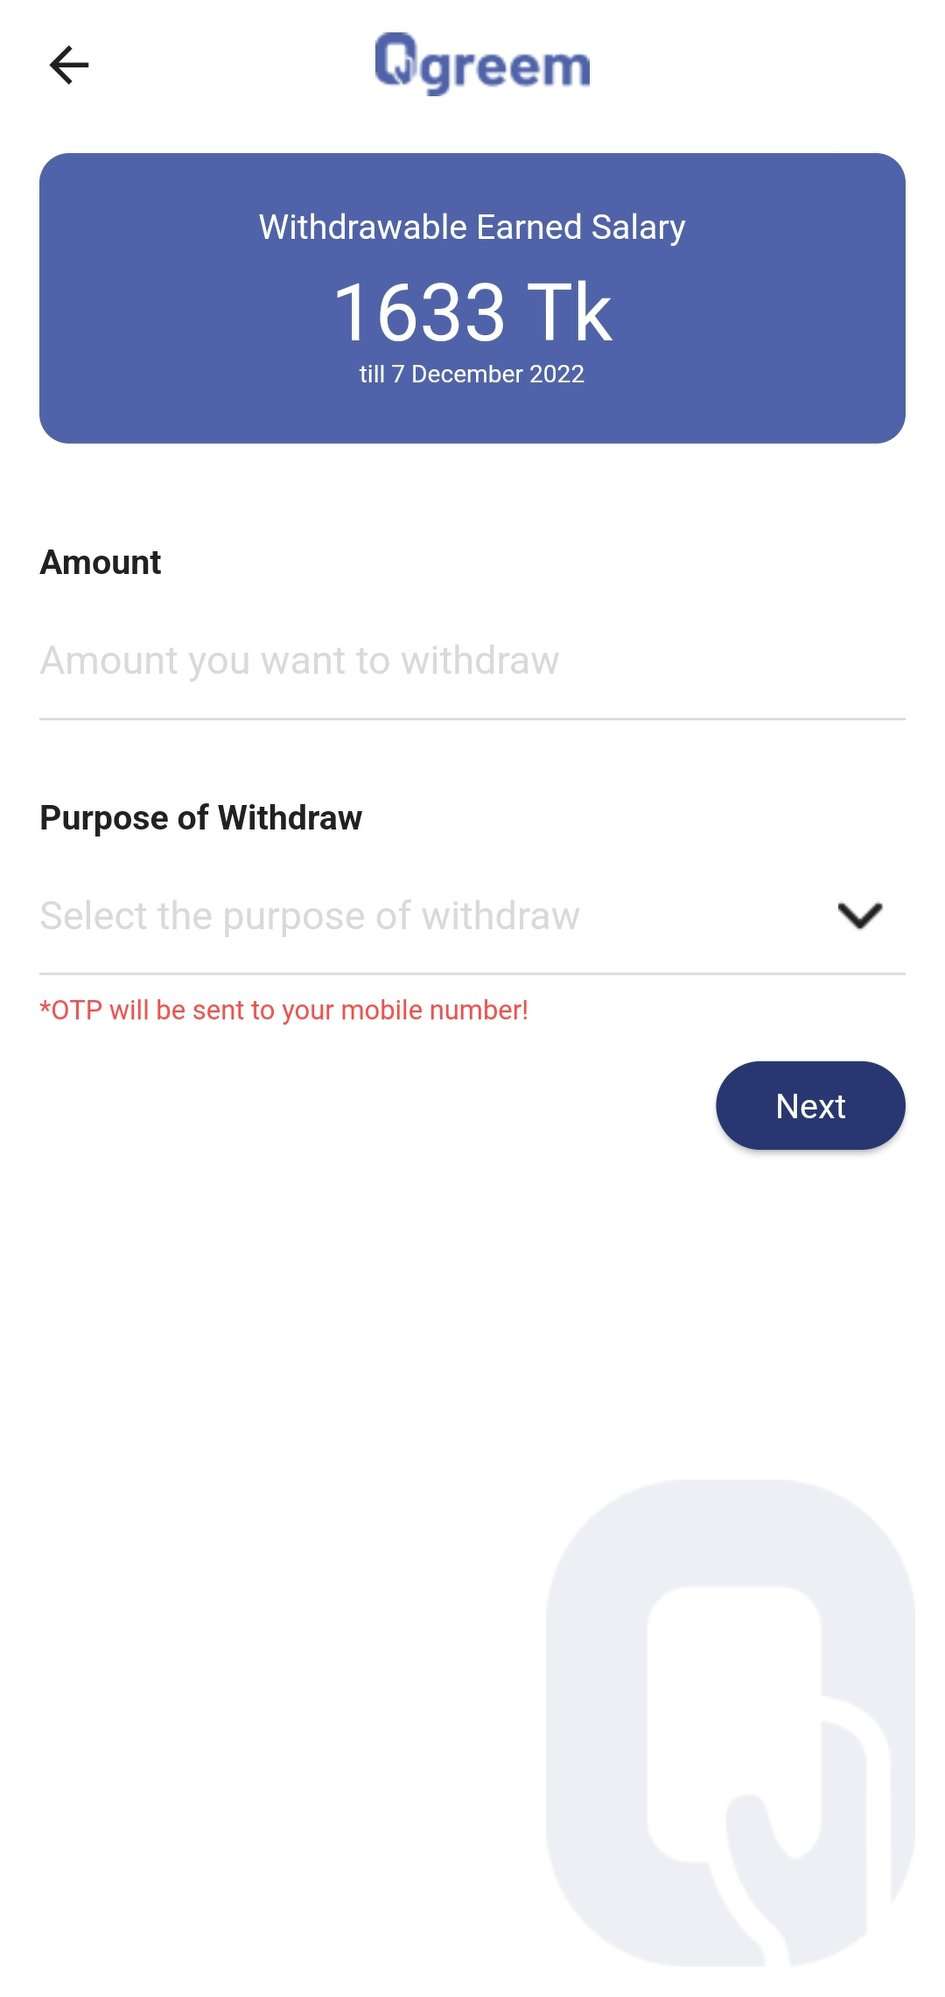 Request for withdraw amount